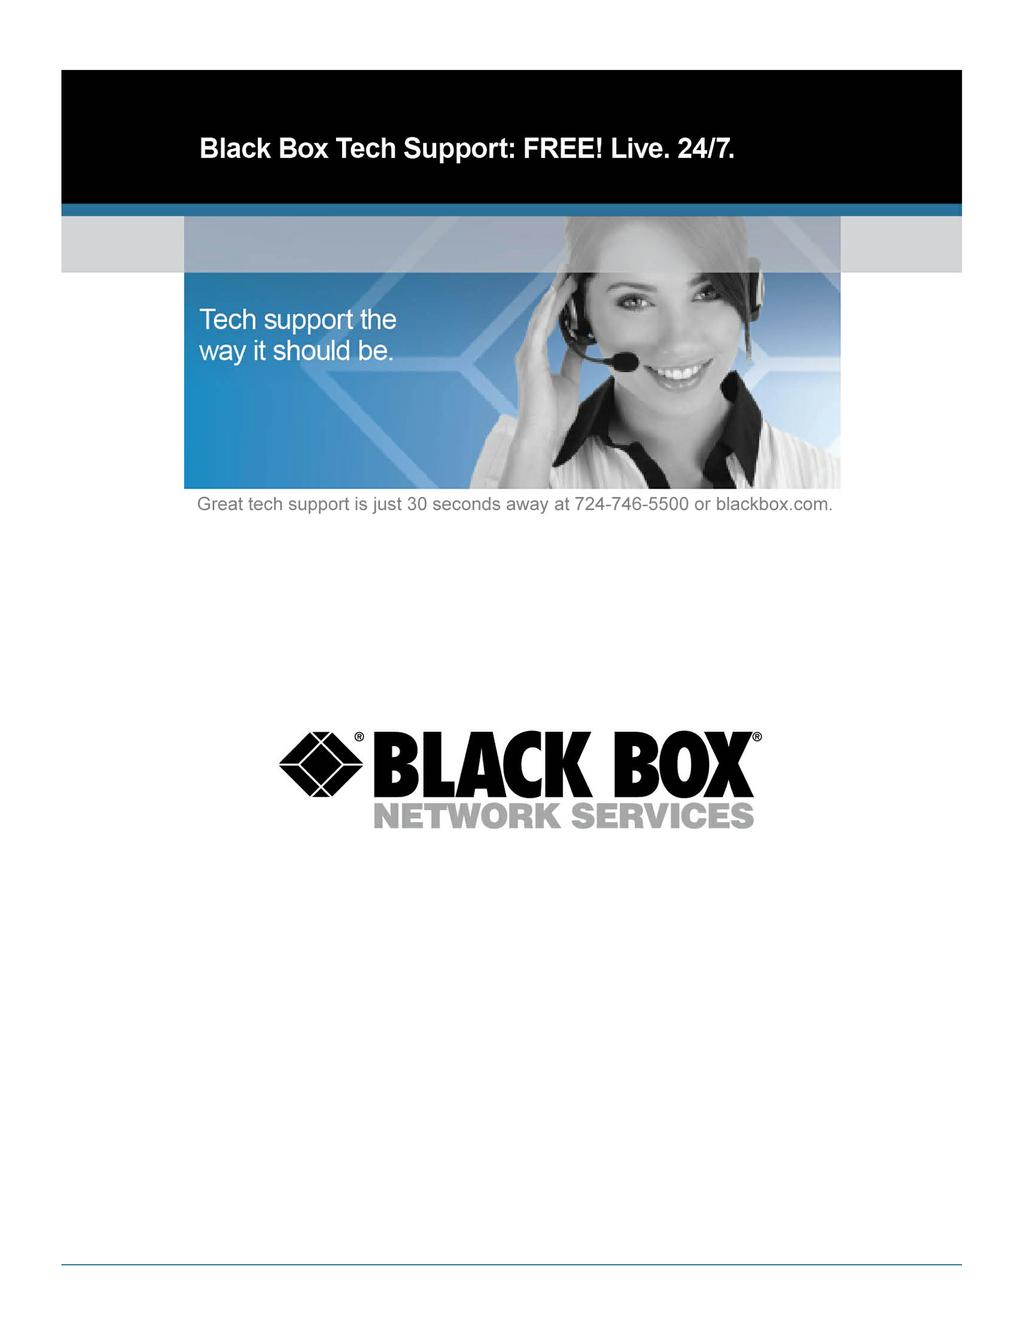 About BlackBox Black Box Network Services is your source for more than 118,000 networking and infrastructure products.